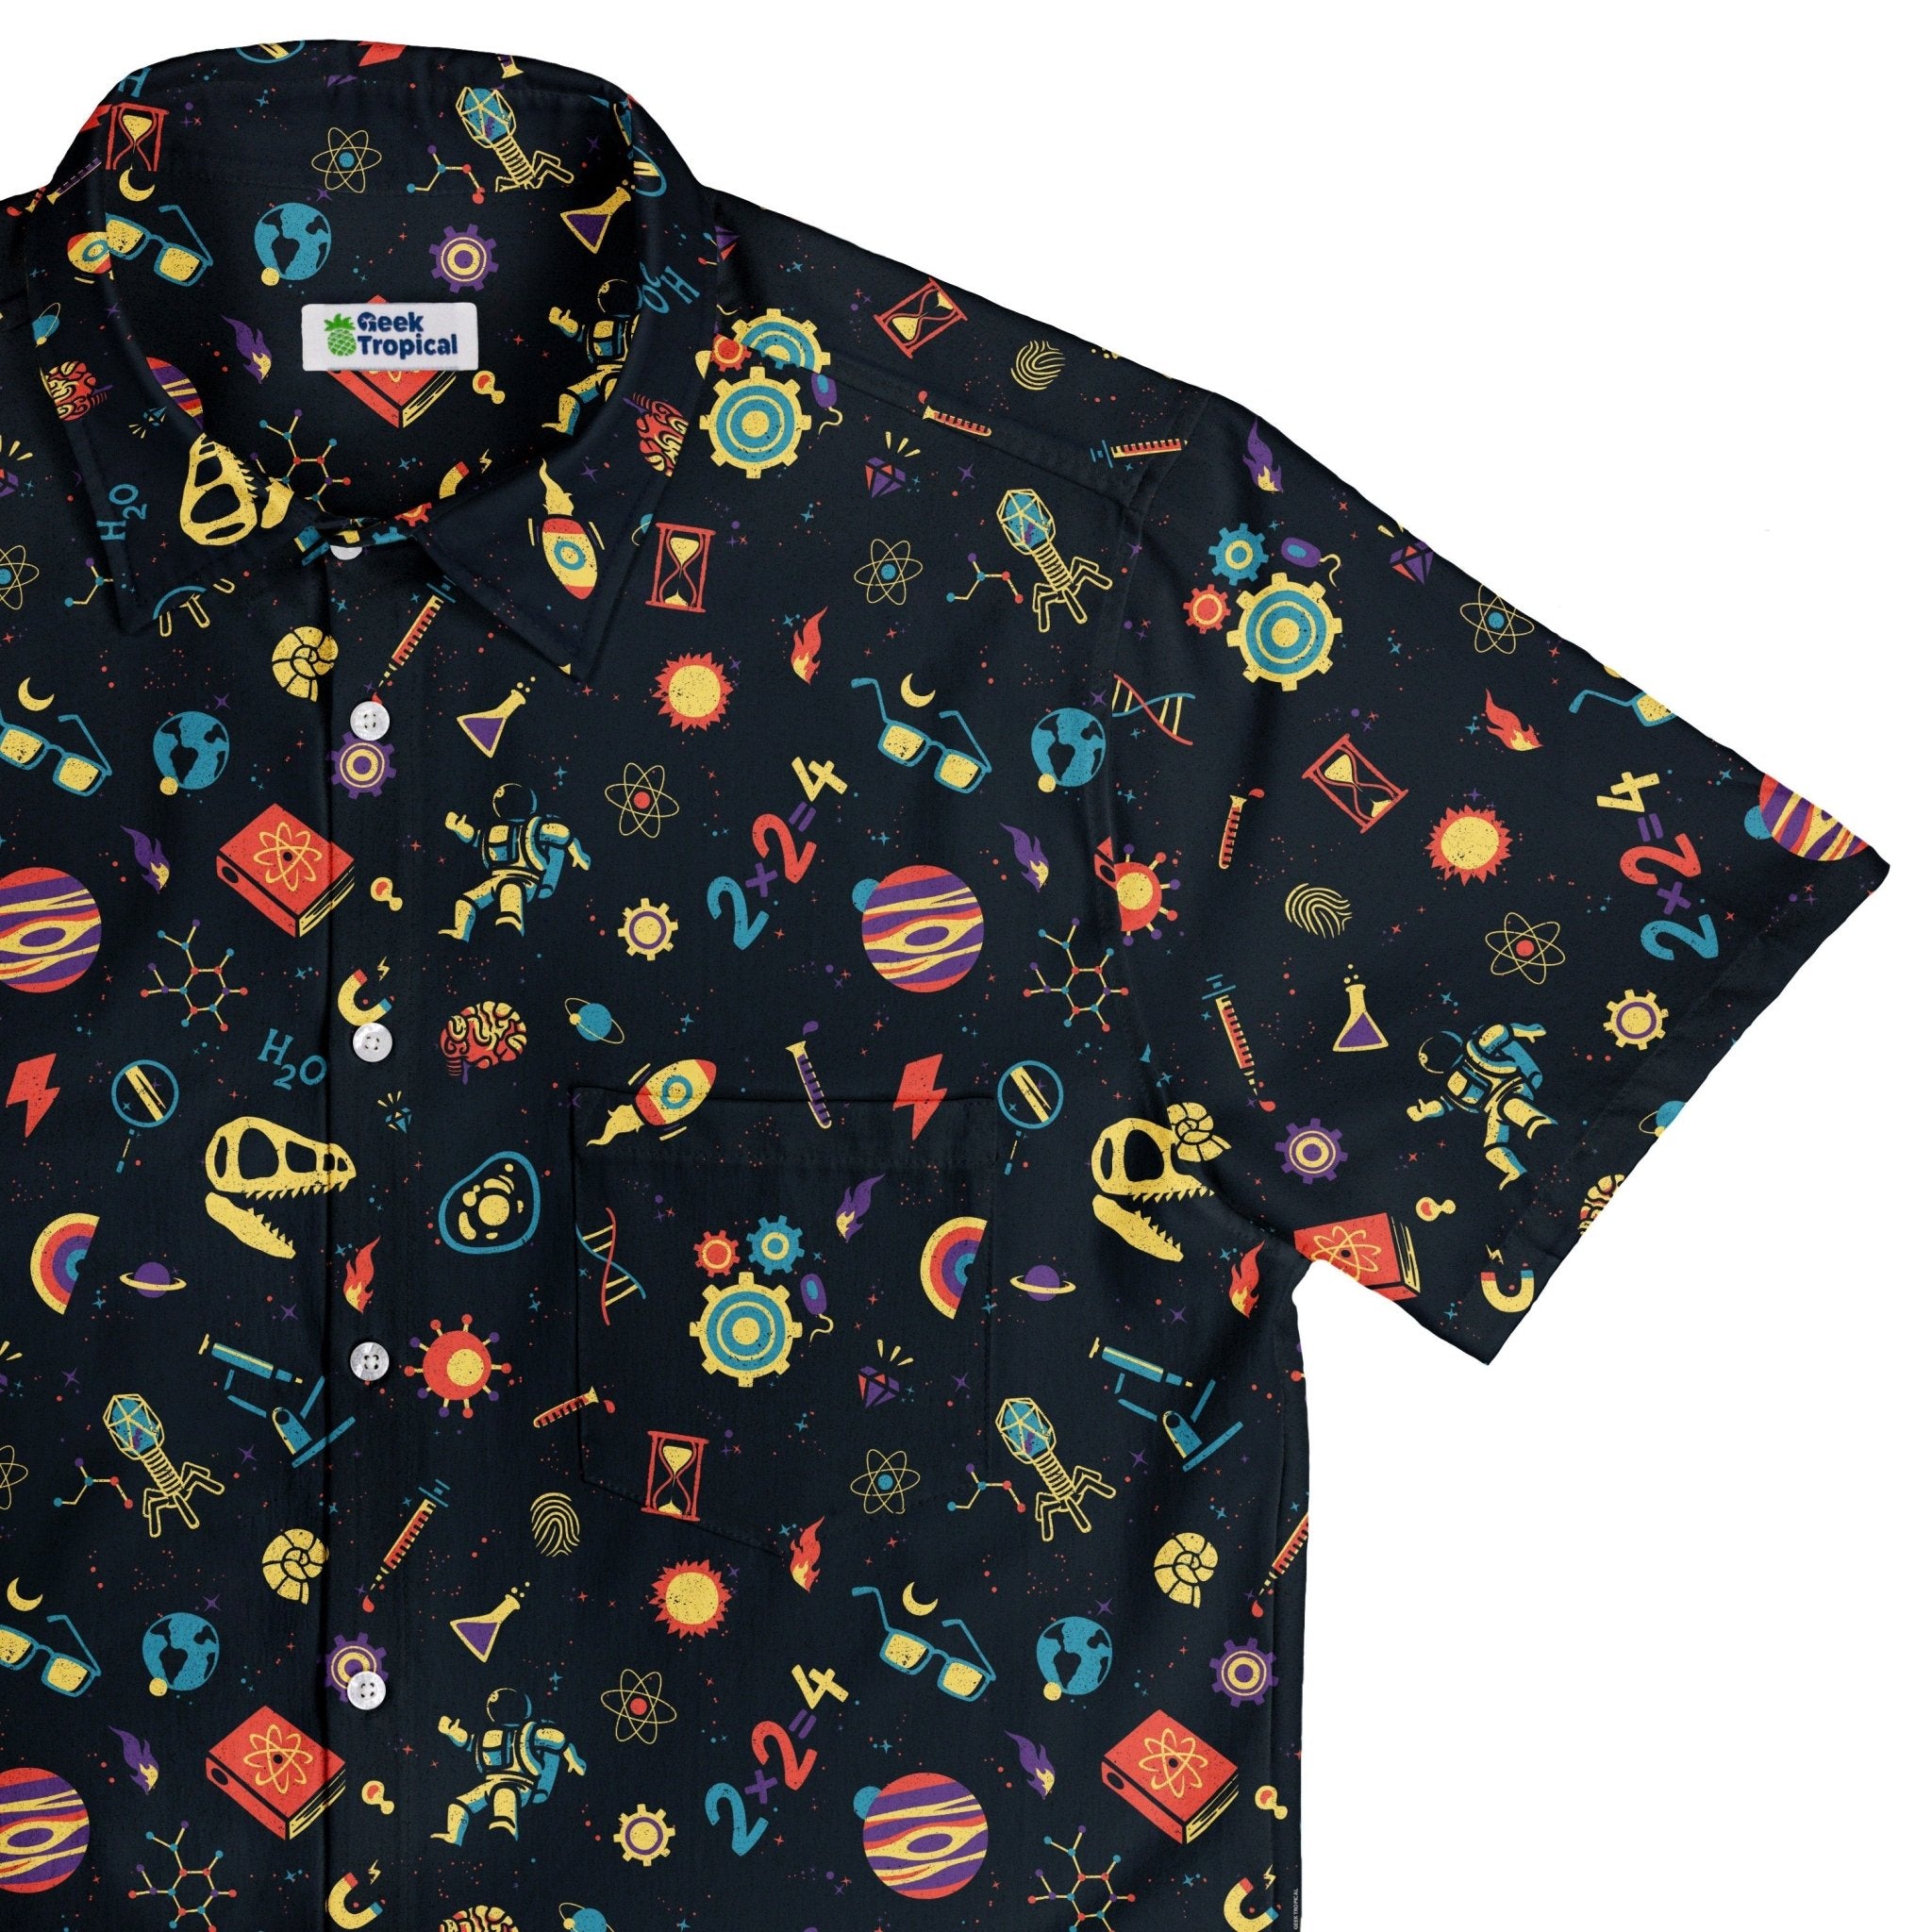 Science Love Button Up Shirt - adult sizing - Design by Tobe Fonseca - Q3 - 2